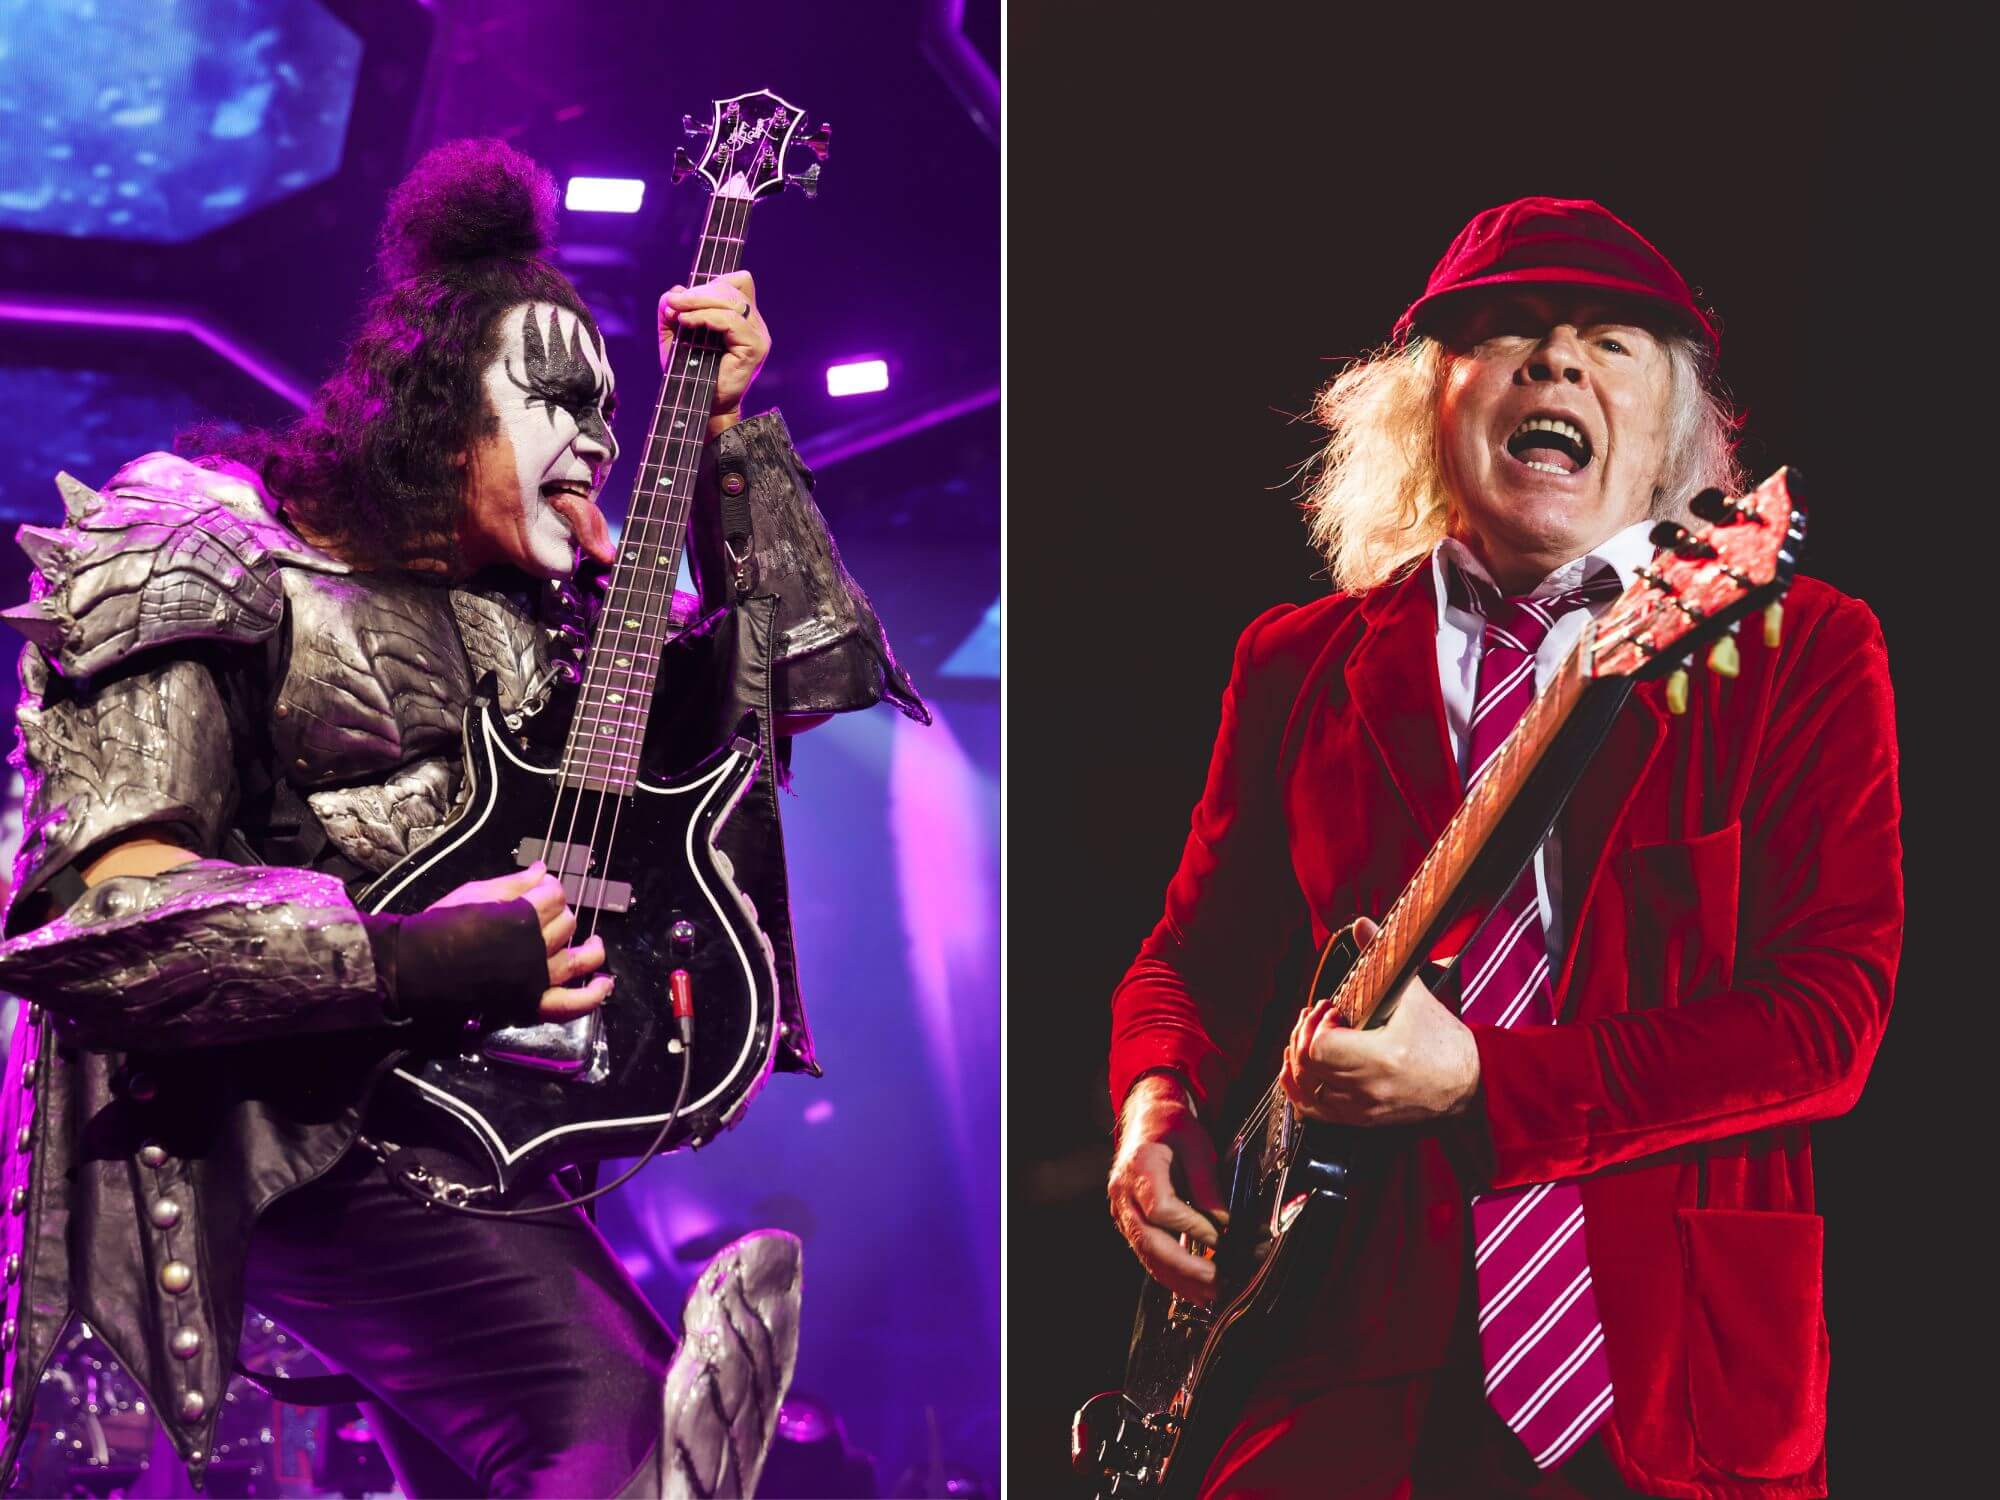 Gene Simmons of Kiss and Angus Young of AC/DC